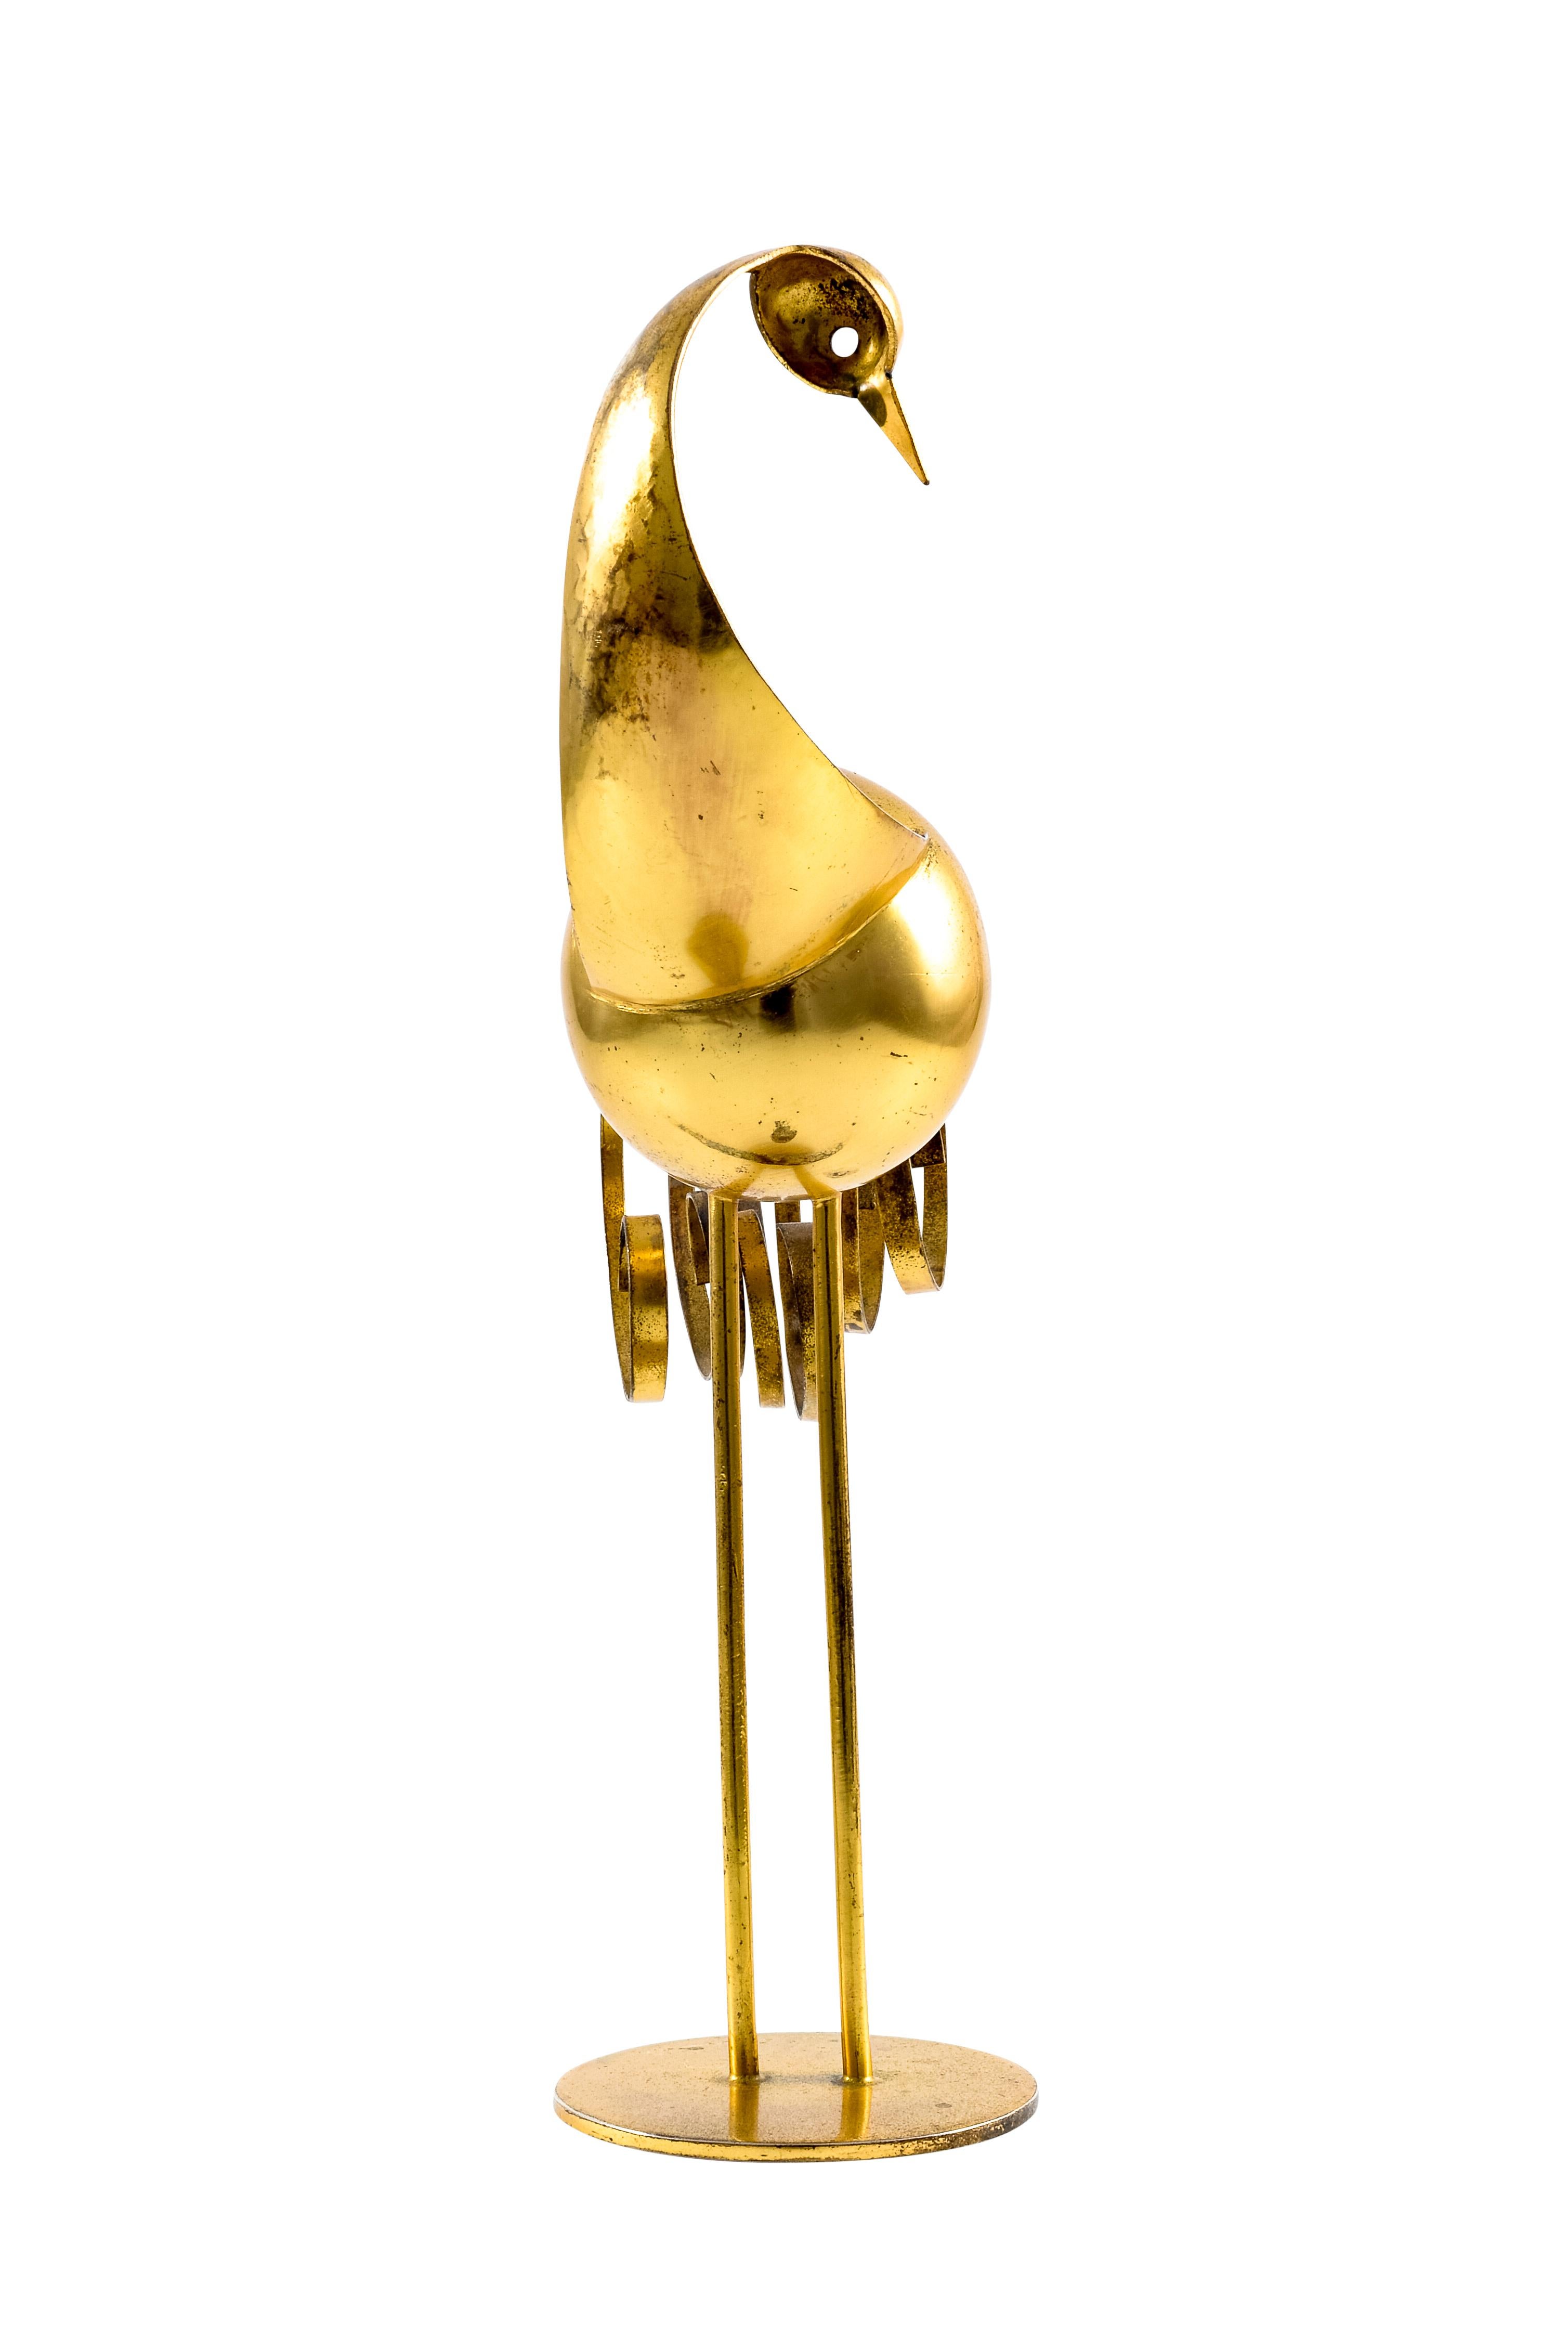 Bird sculpture Franz Hagenauer Werkstatte Hagenauer Vienna Alpaca brass-plated 1930s Austrian Art Deco

Stylized animal depictions in metal and wood were typical products of the Werkstatte Hagenauer Wien. One of the most popular export articles of